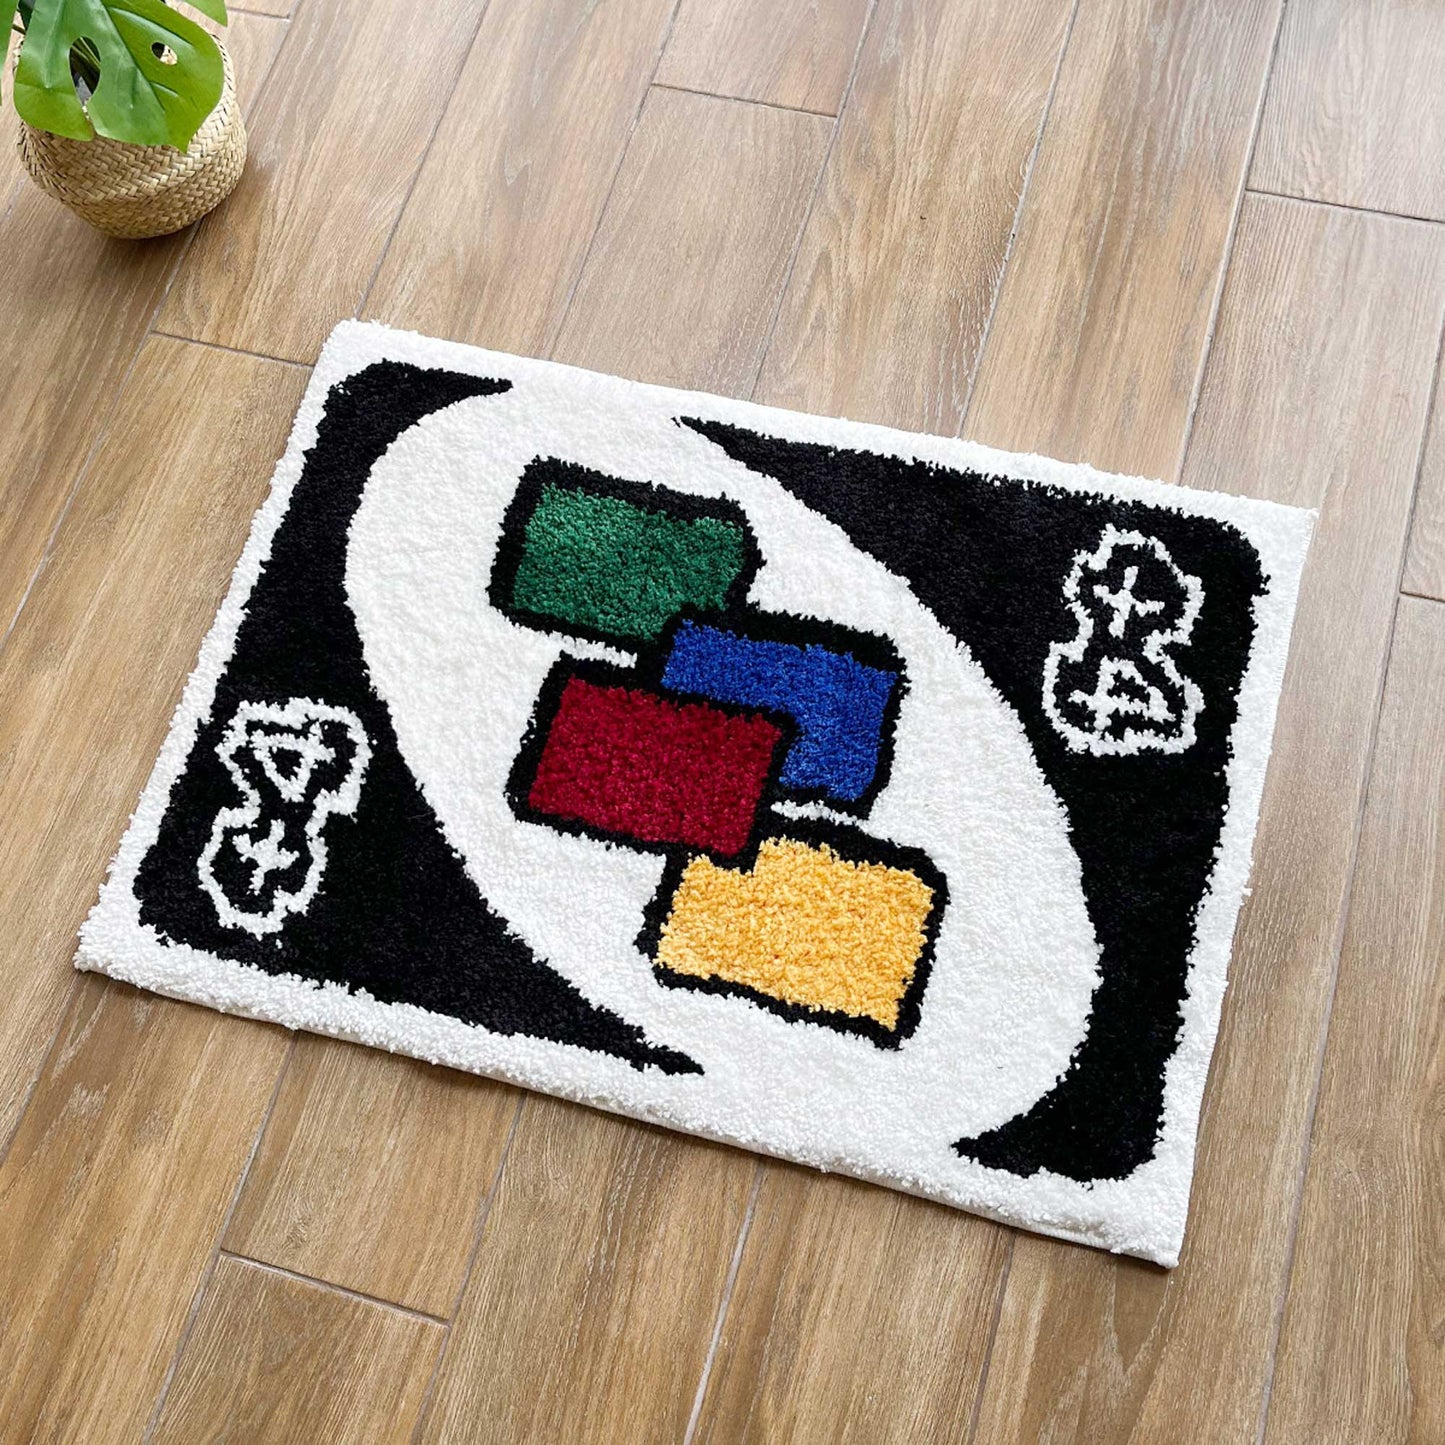 Tufted Rug +4 UNO Card Rug Front 